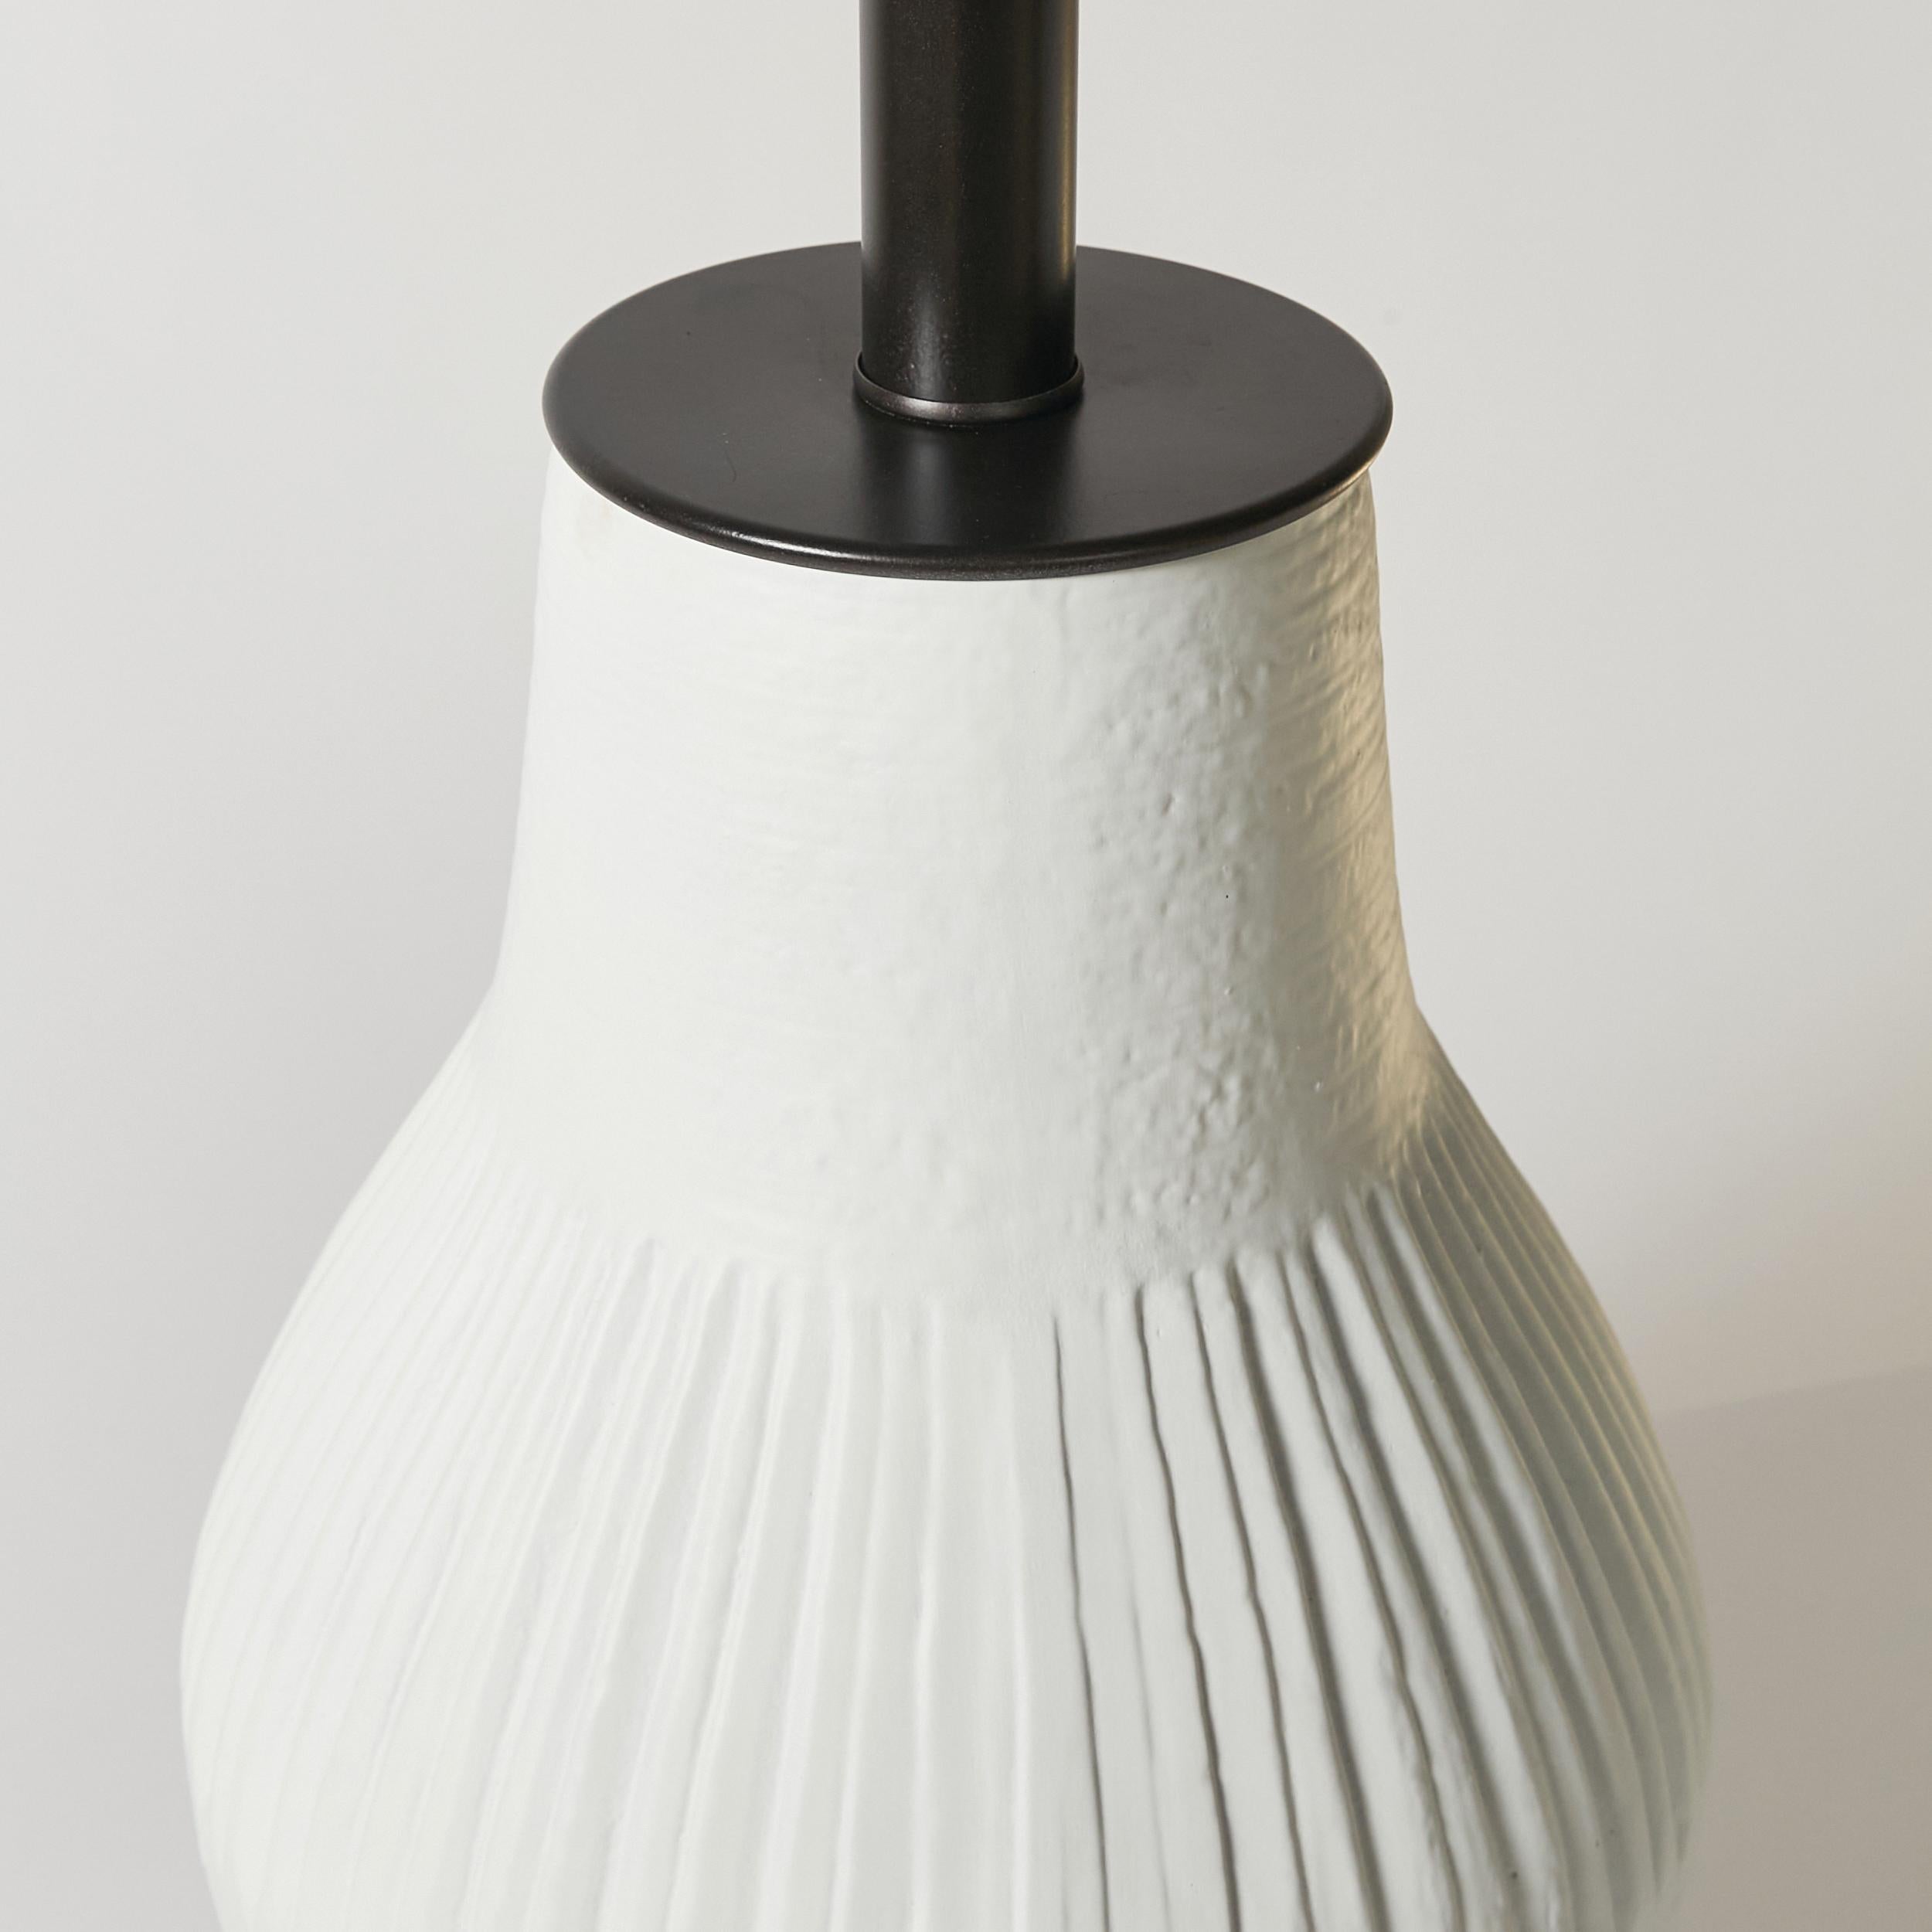 20th Century West Coast Pottery Table Lamp Finished in White Gesso